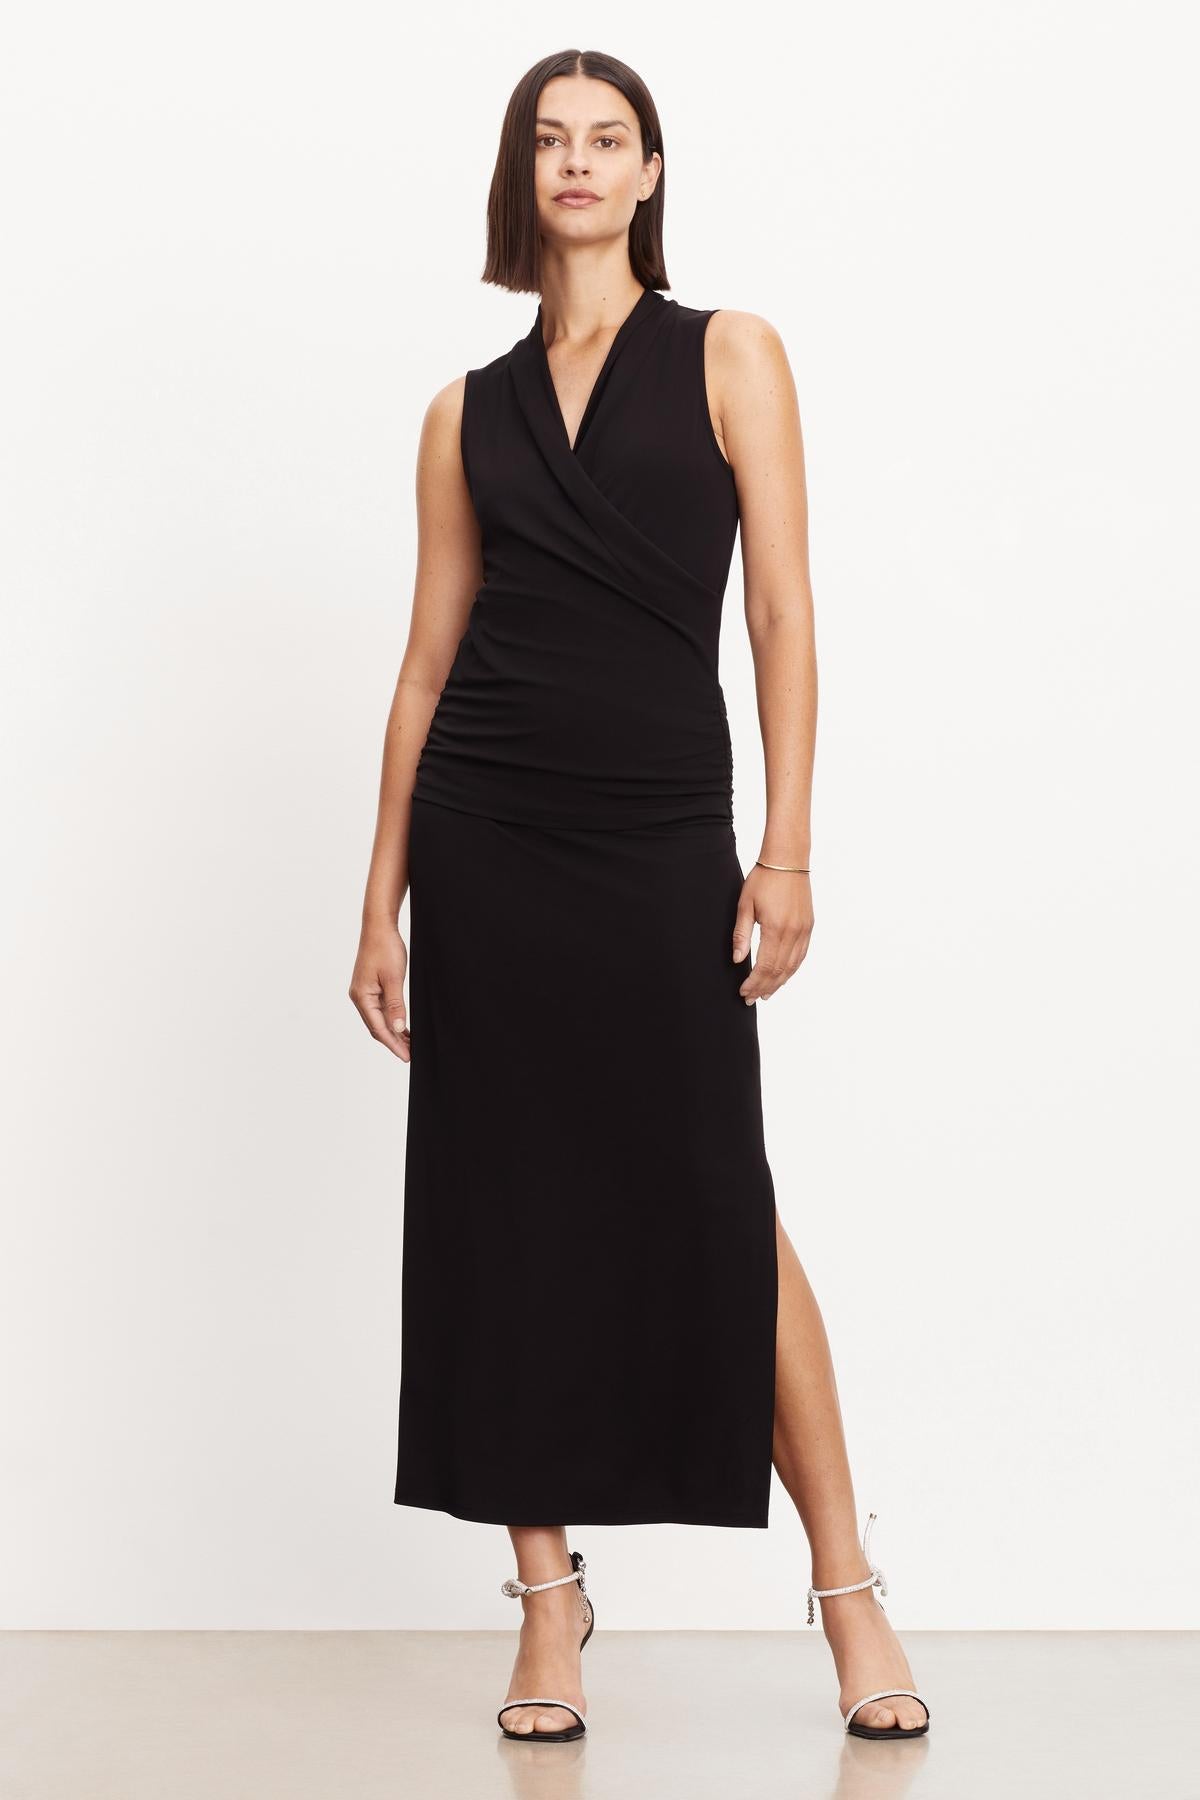 A woman wearing a Velvet by Graham & Spencer sleeveless dress with a slit.-35696219324609